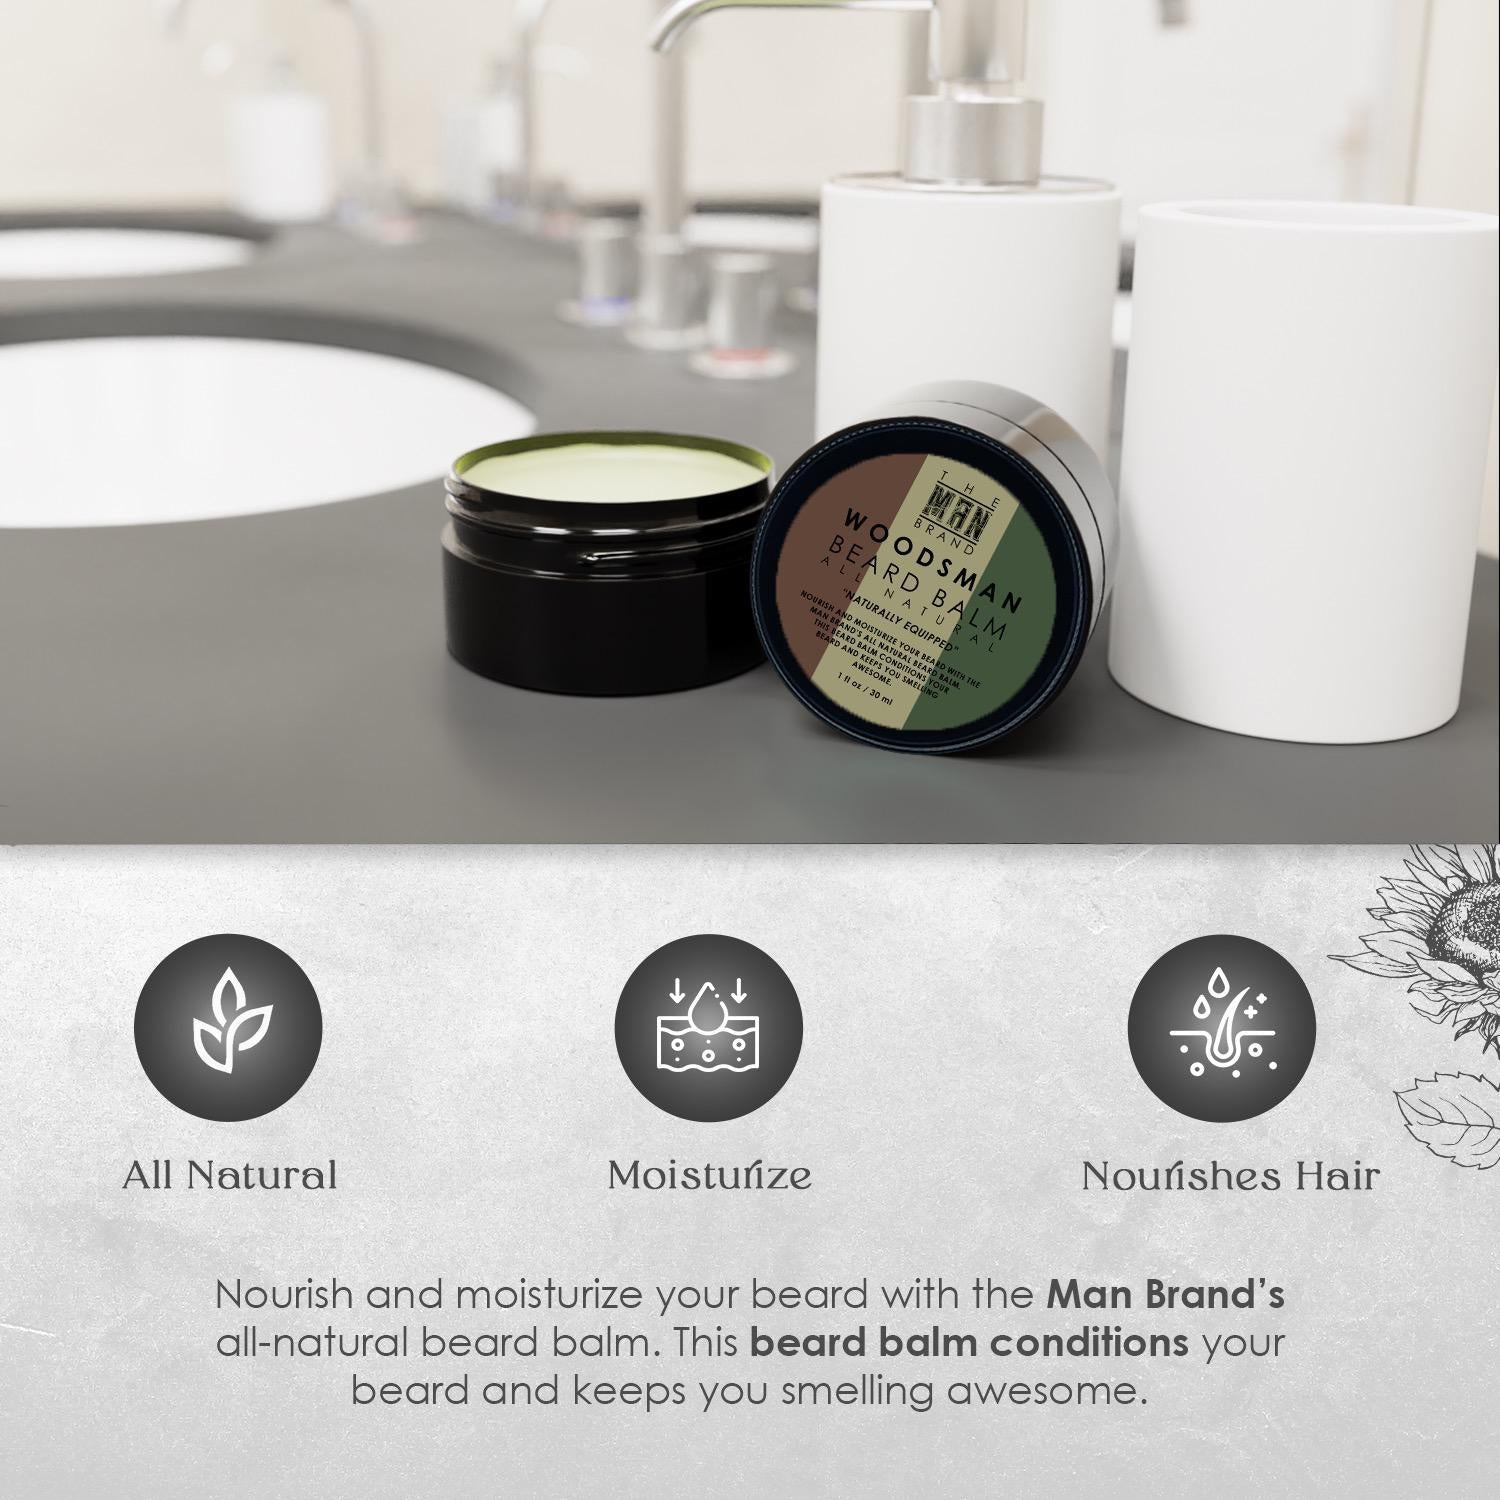 The Man Brand Beard Balm Sample Pack for Men - Natural Beeswax Based Conditioning Balm For Beard Care - Scented Beard Balm For Styling in a Round Screw Top Tin